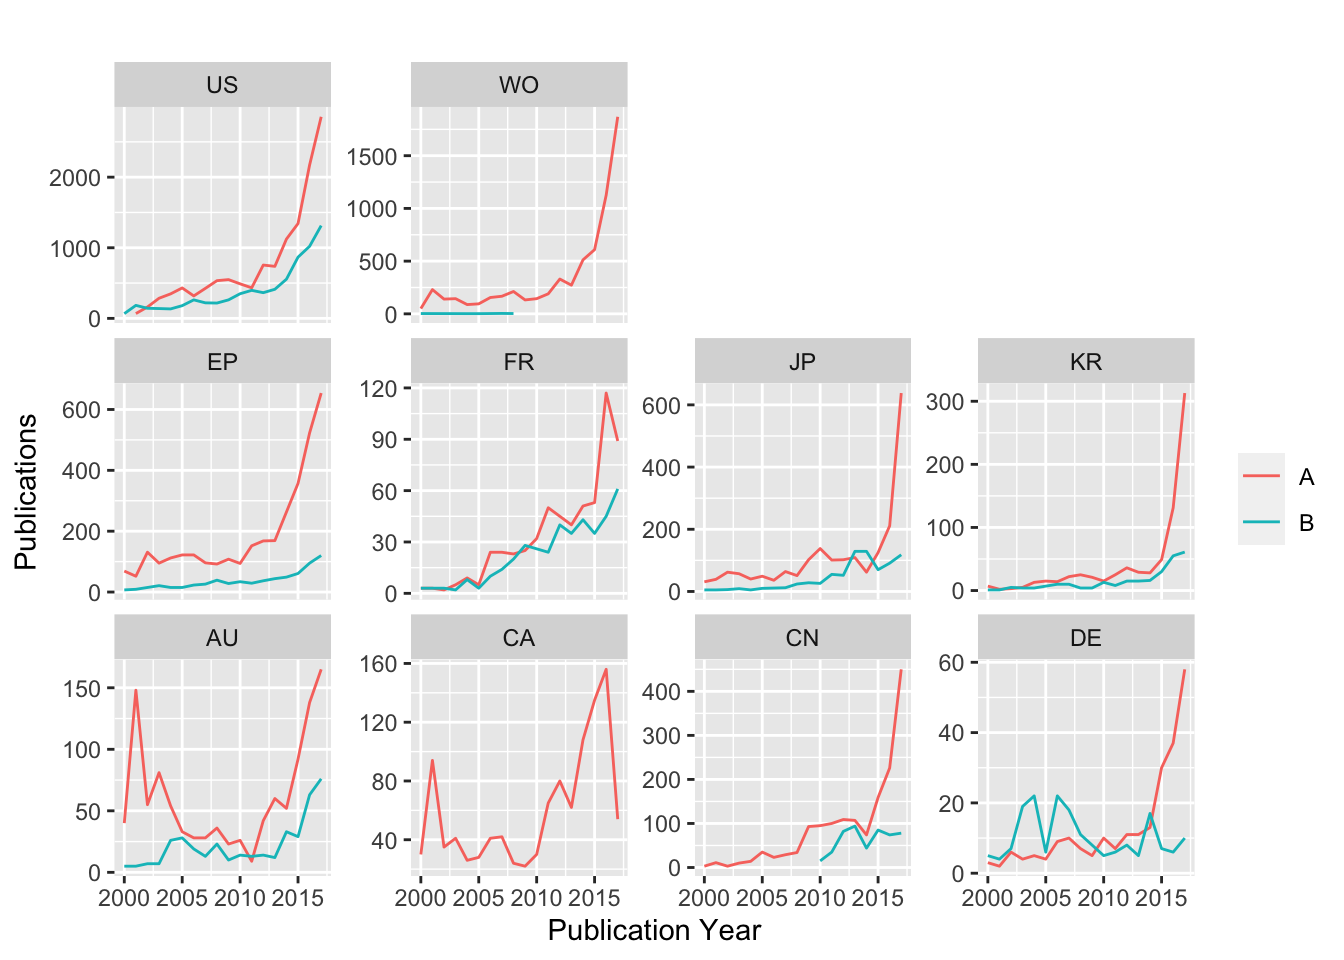 Publication Trends for Top Ten Countries with Kind Code A and B